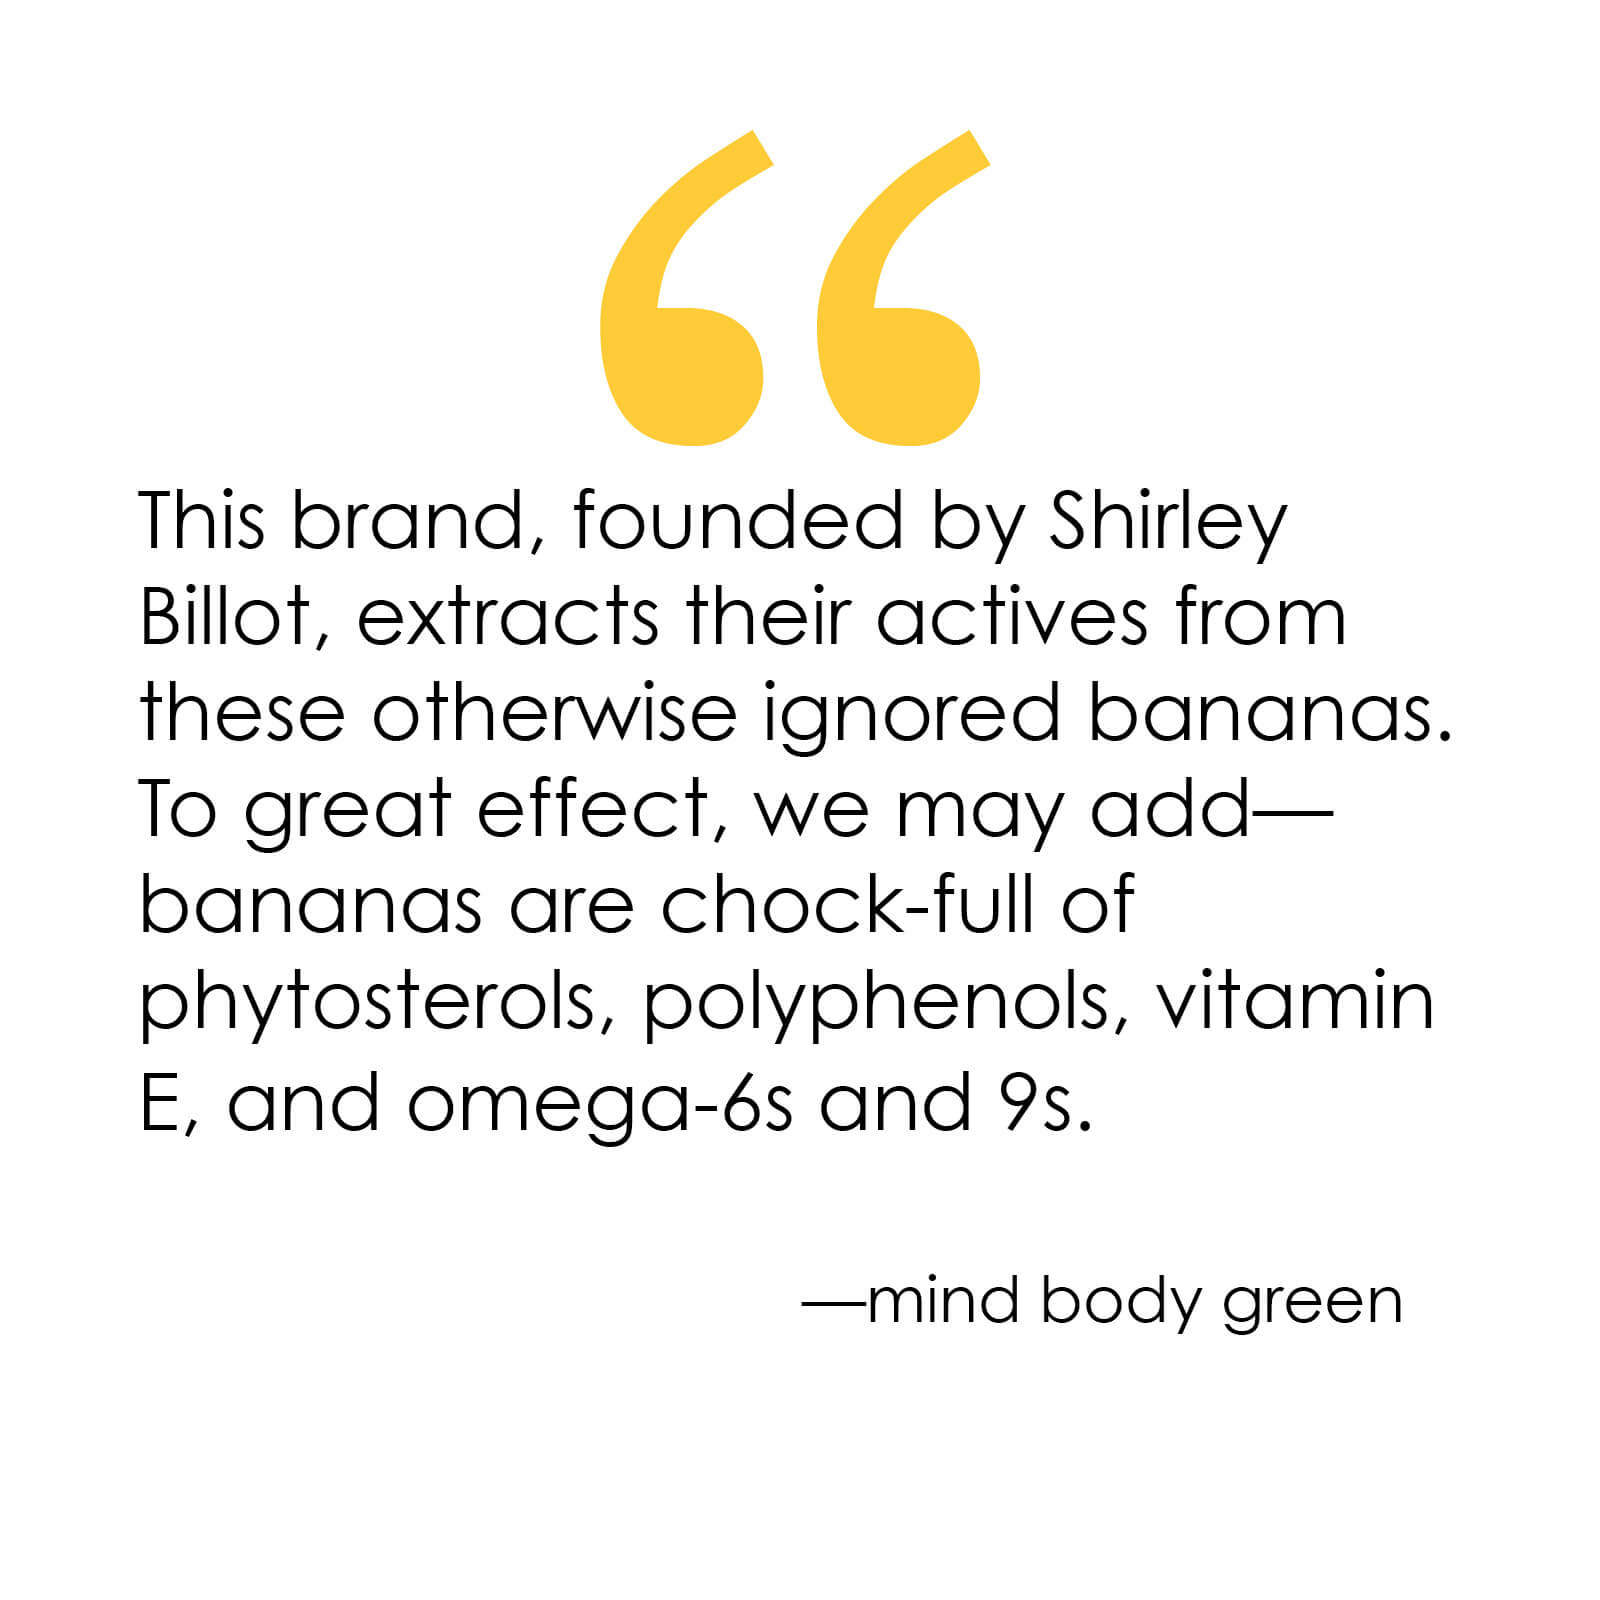 Review by mind body green